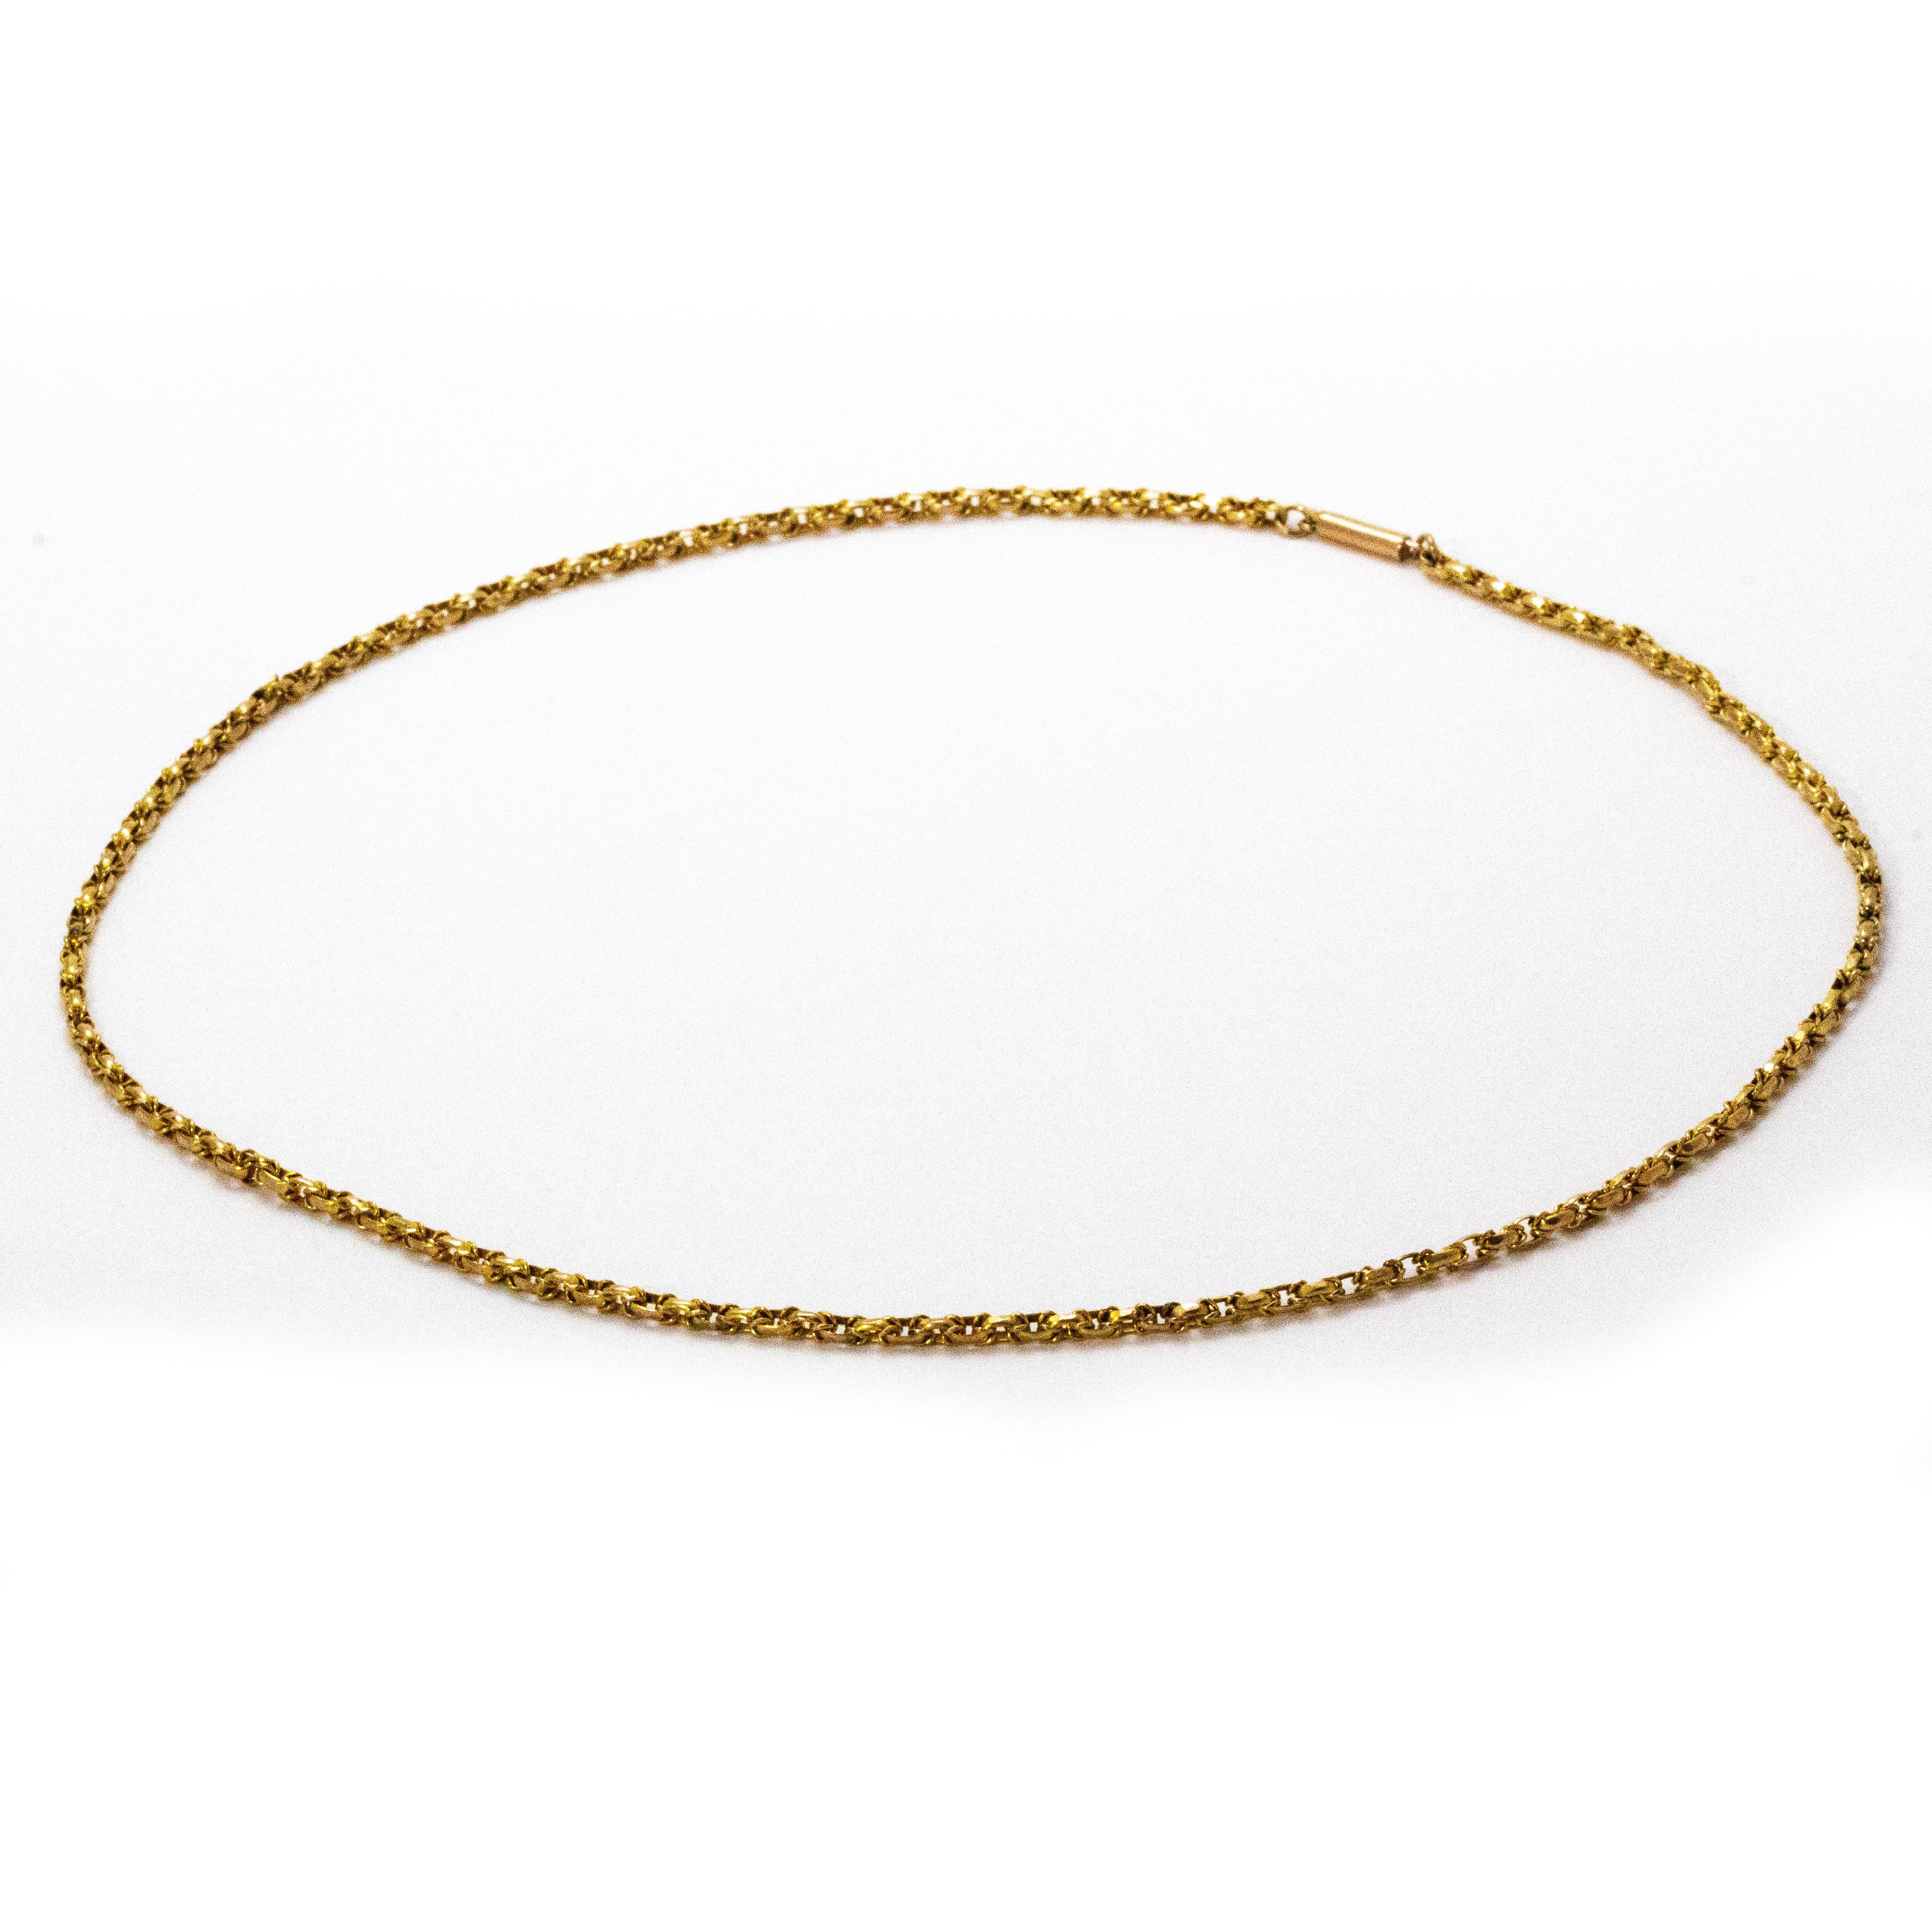 Beautifully decorative victorian 9ct gold chain with a barrel clasp.

Length: 18 1/2inches